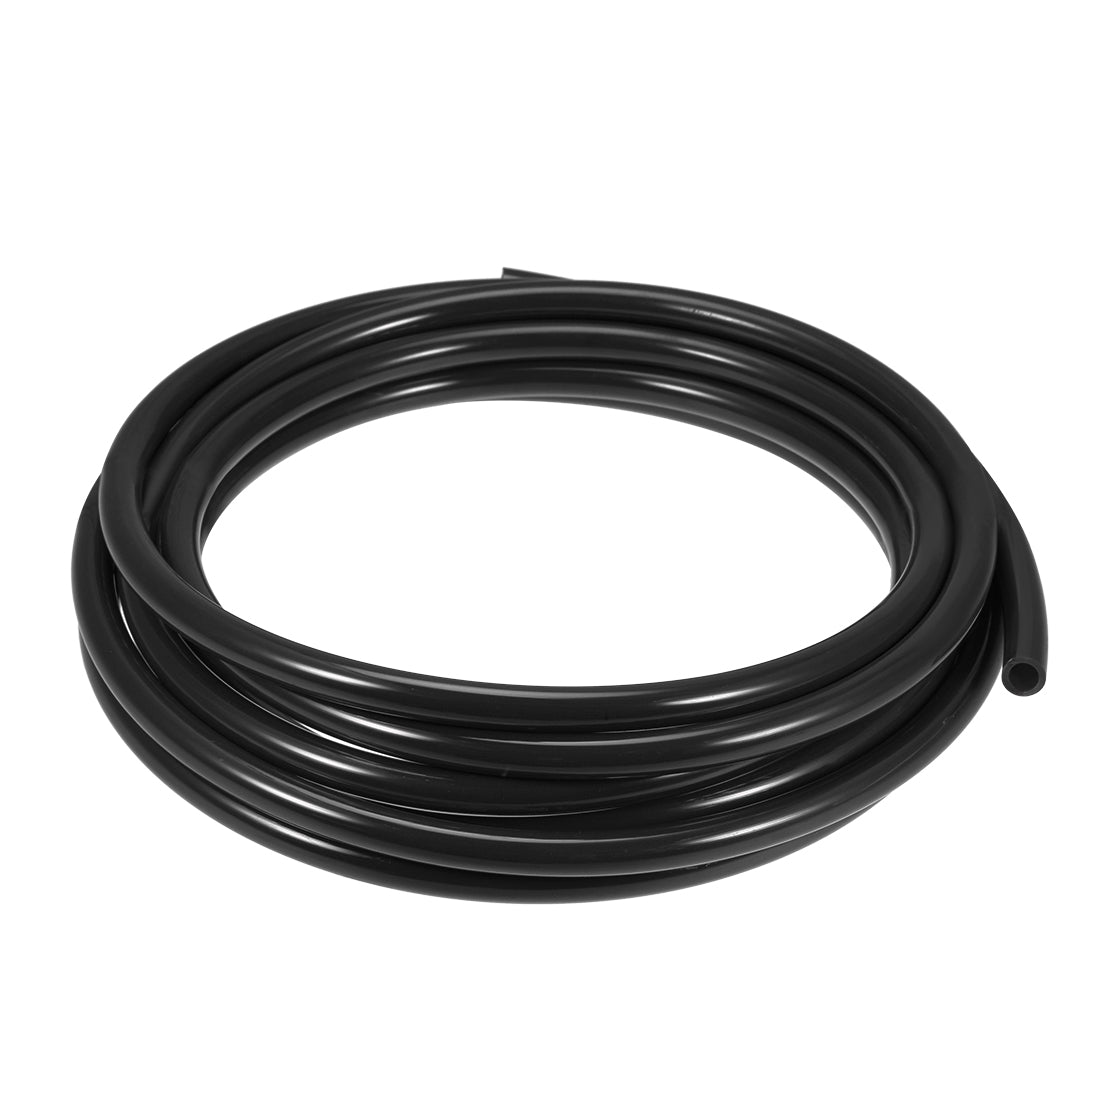 Uxcell Uxcell 12mm OD 8mm ID 5m Long Black PU Air Tubing Pipe Hose for Air Line Tube Fluid Transfer Pneumatic Tubing